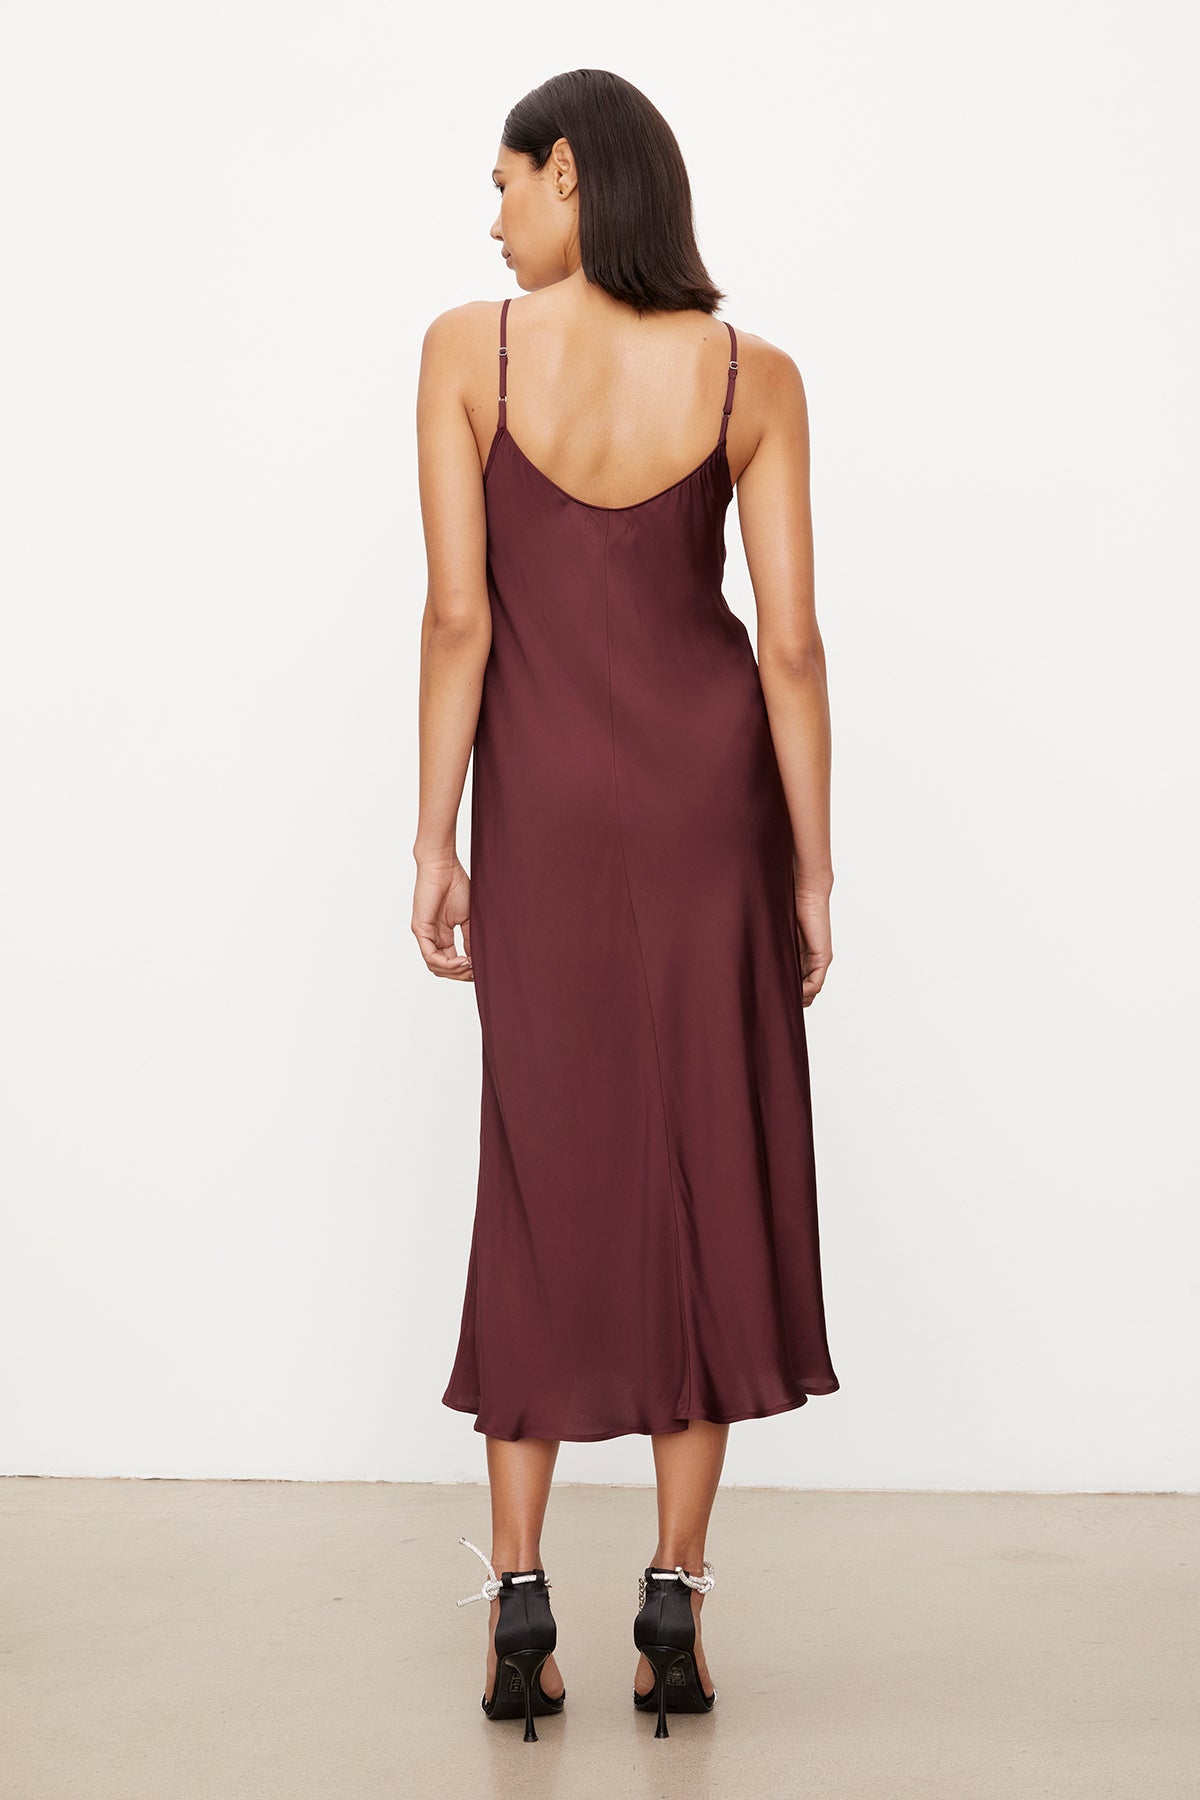 The versatile slip dress, the POPPY SATIN SLIP DRESS by Velvet by Graham & Spencer, features adjustable straps and showcases the back view of a woman wearing a burgundy slip dress.-35571939475649